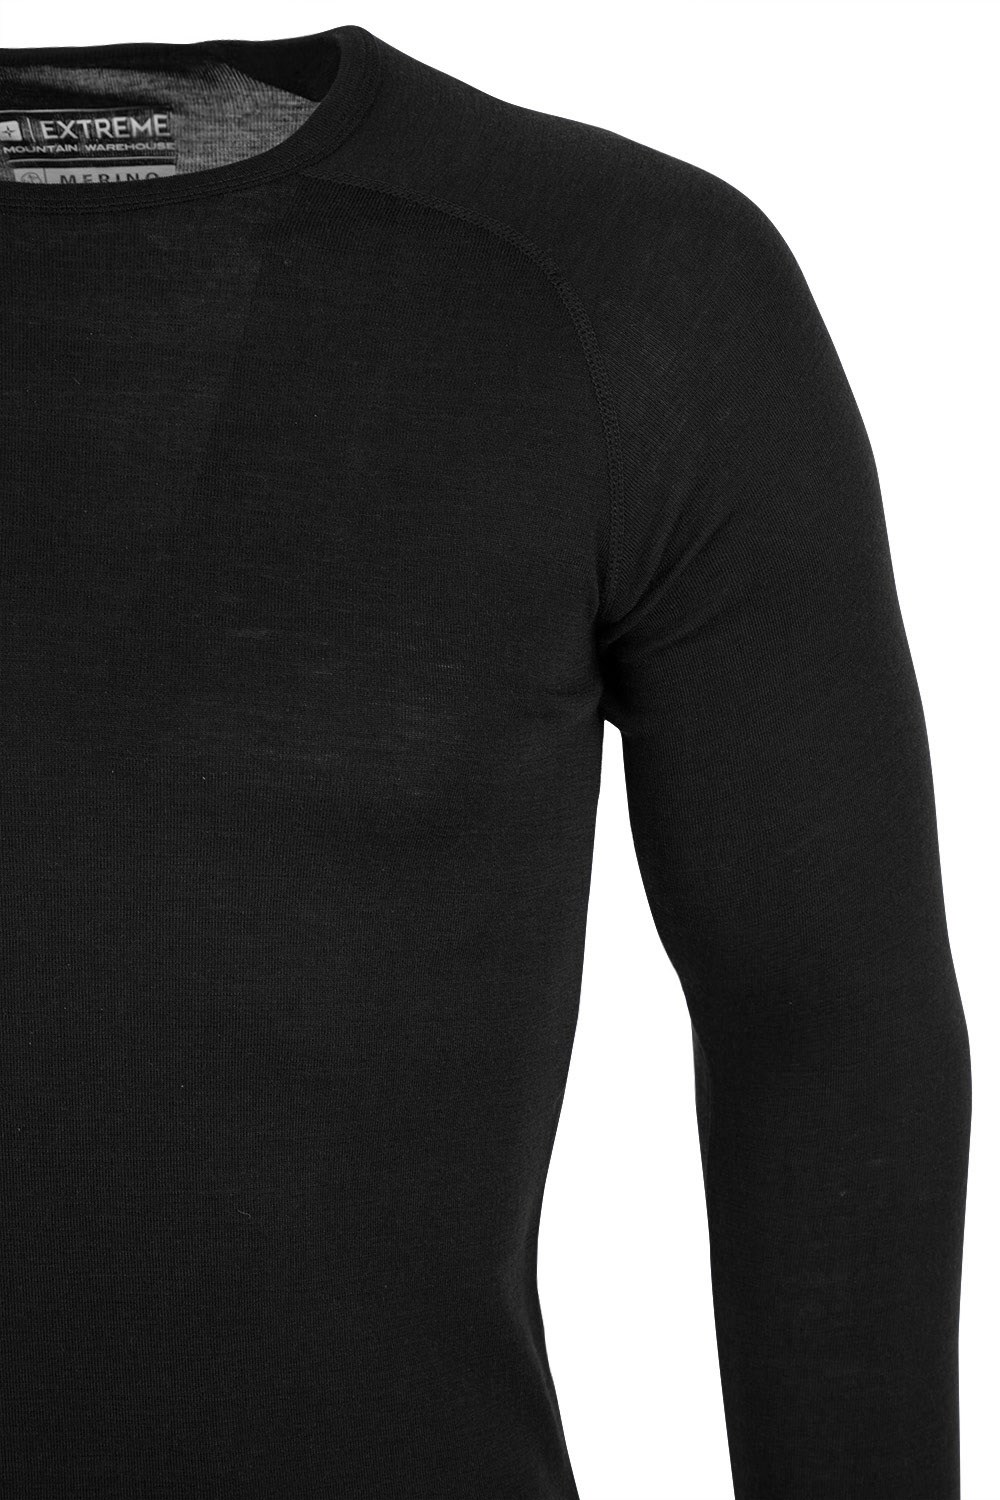 Details about   Mens Long Sleeve Breathable Thermal Baselayer Mountain Warehouse  XL Dark Grey 